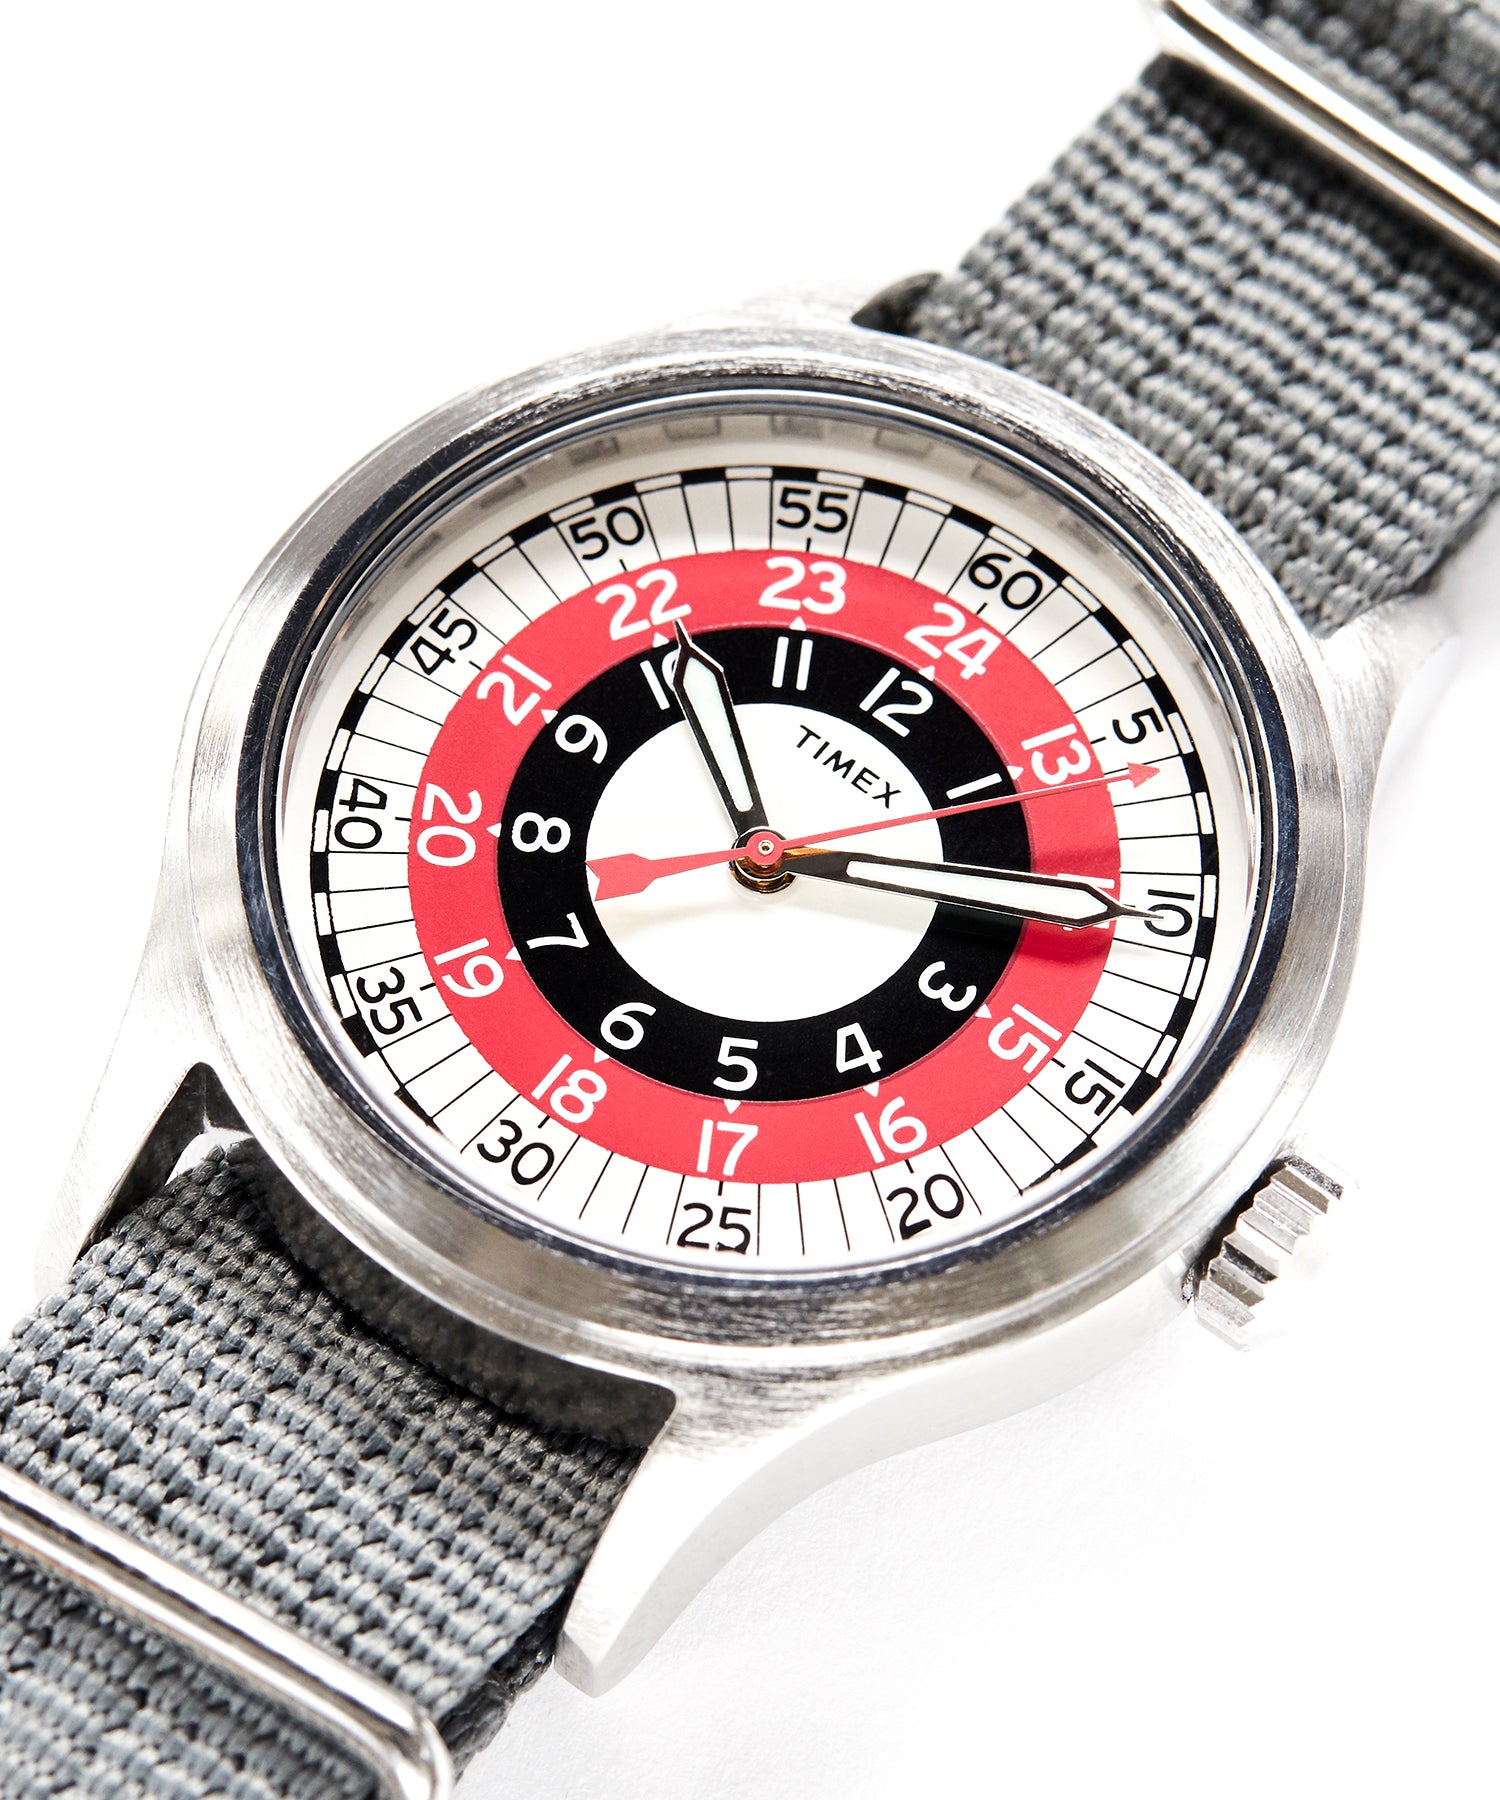 The Mod Watch by Timex + Todd Snyder